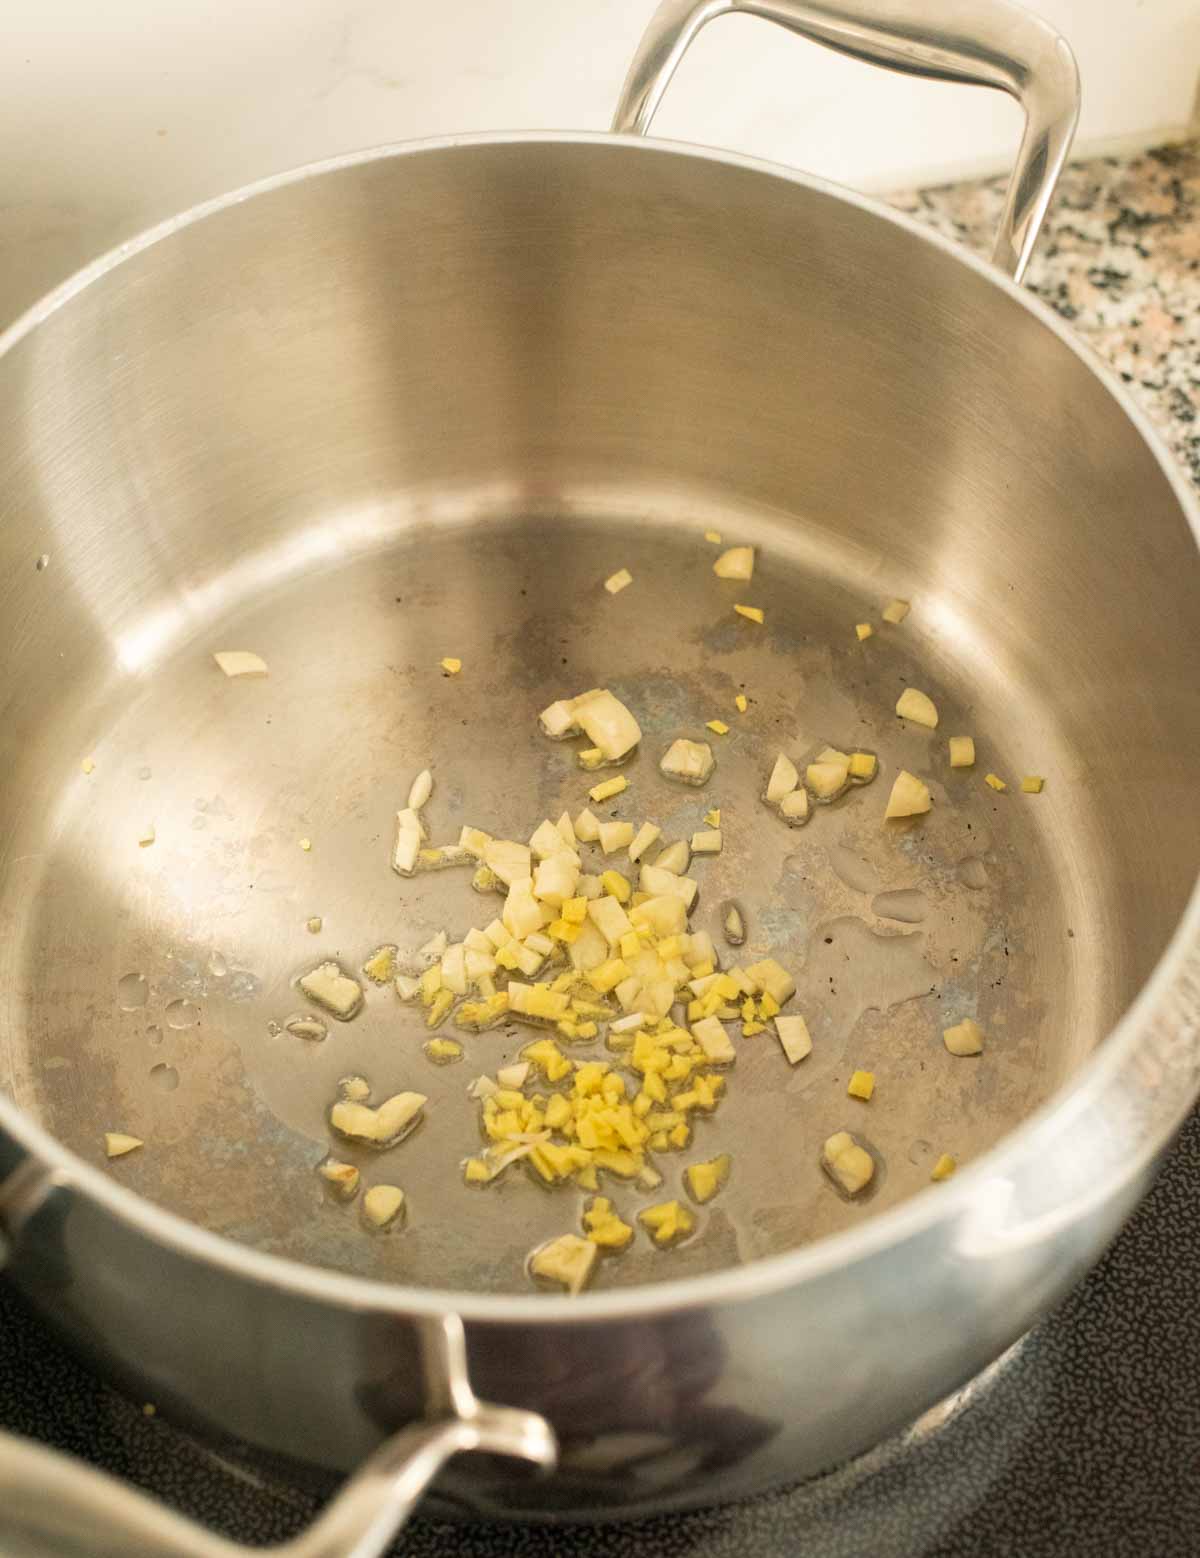 Garlic and ginger in a pot on the stovetop